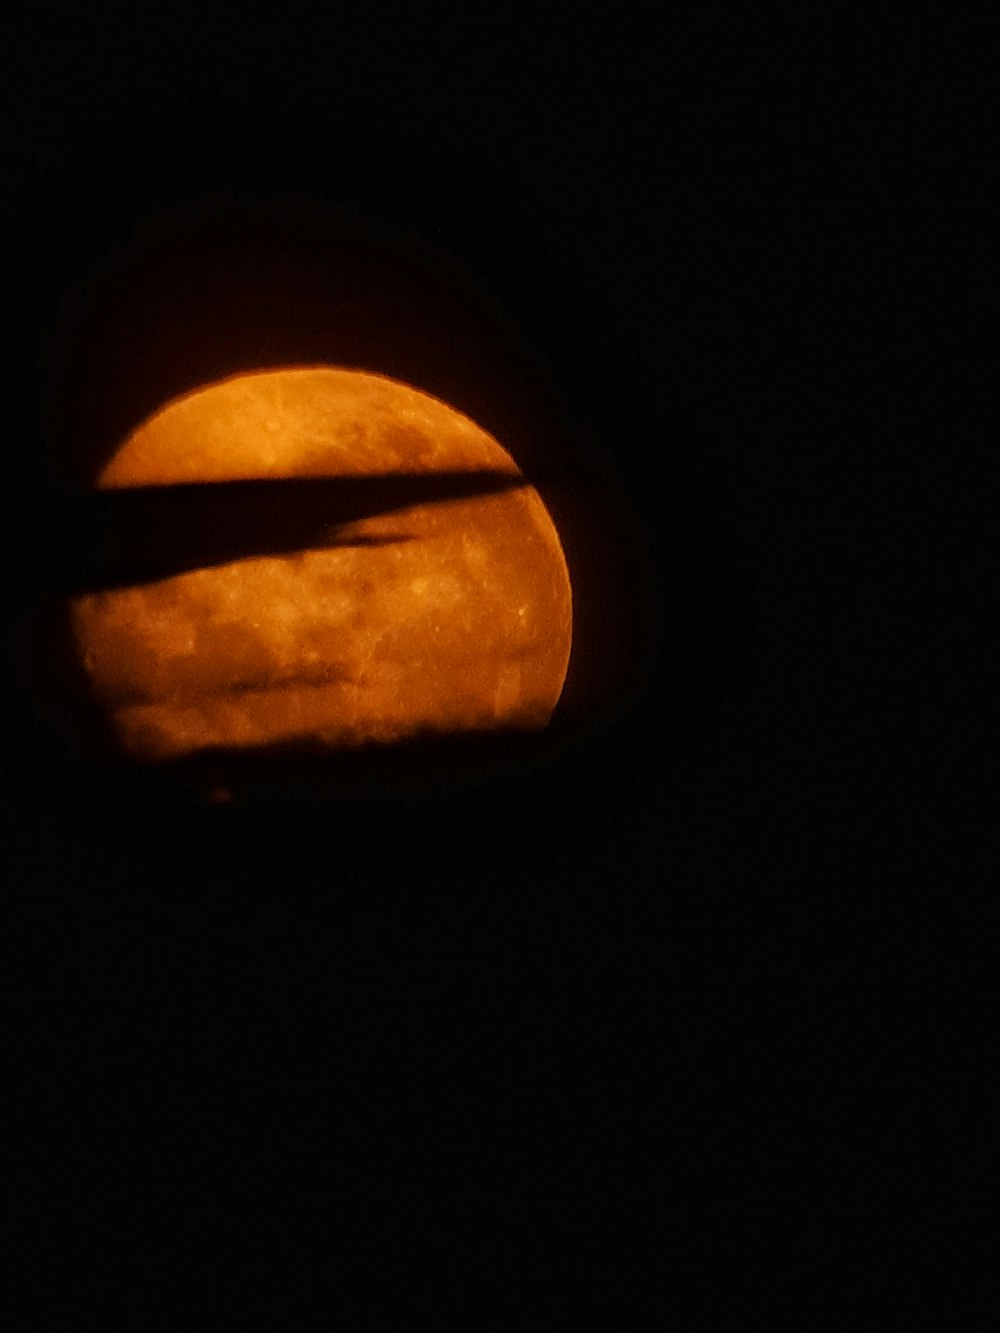 a view of the moon through a window